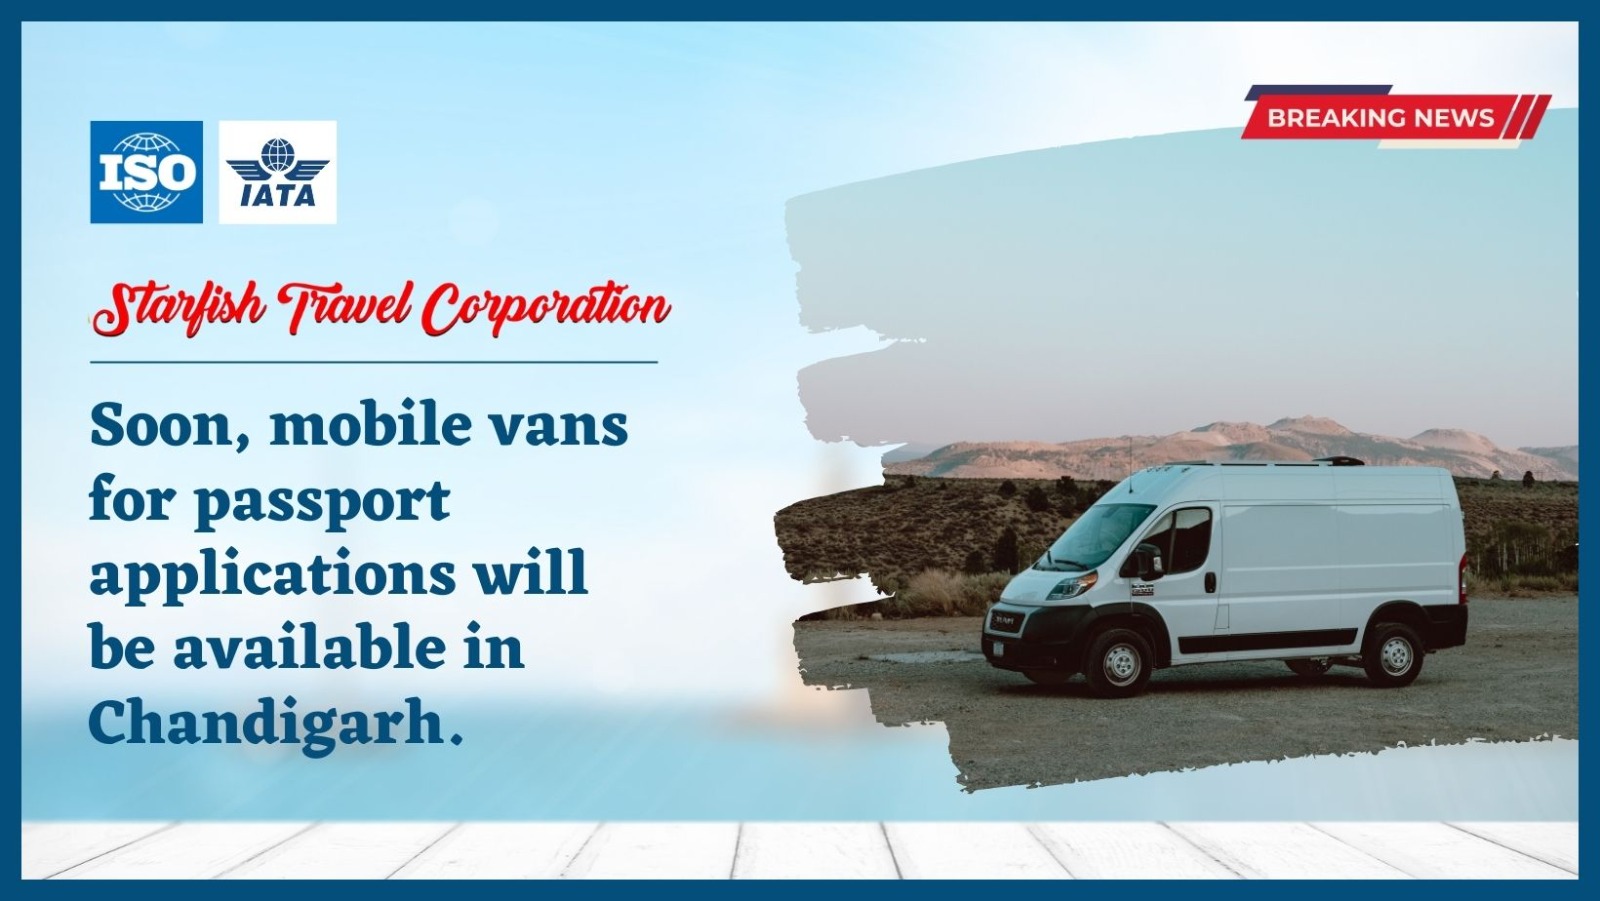 Soon, mobile vans for passport applications will be available in Chandigarh.